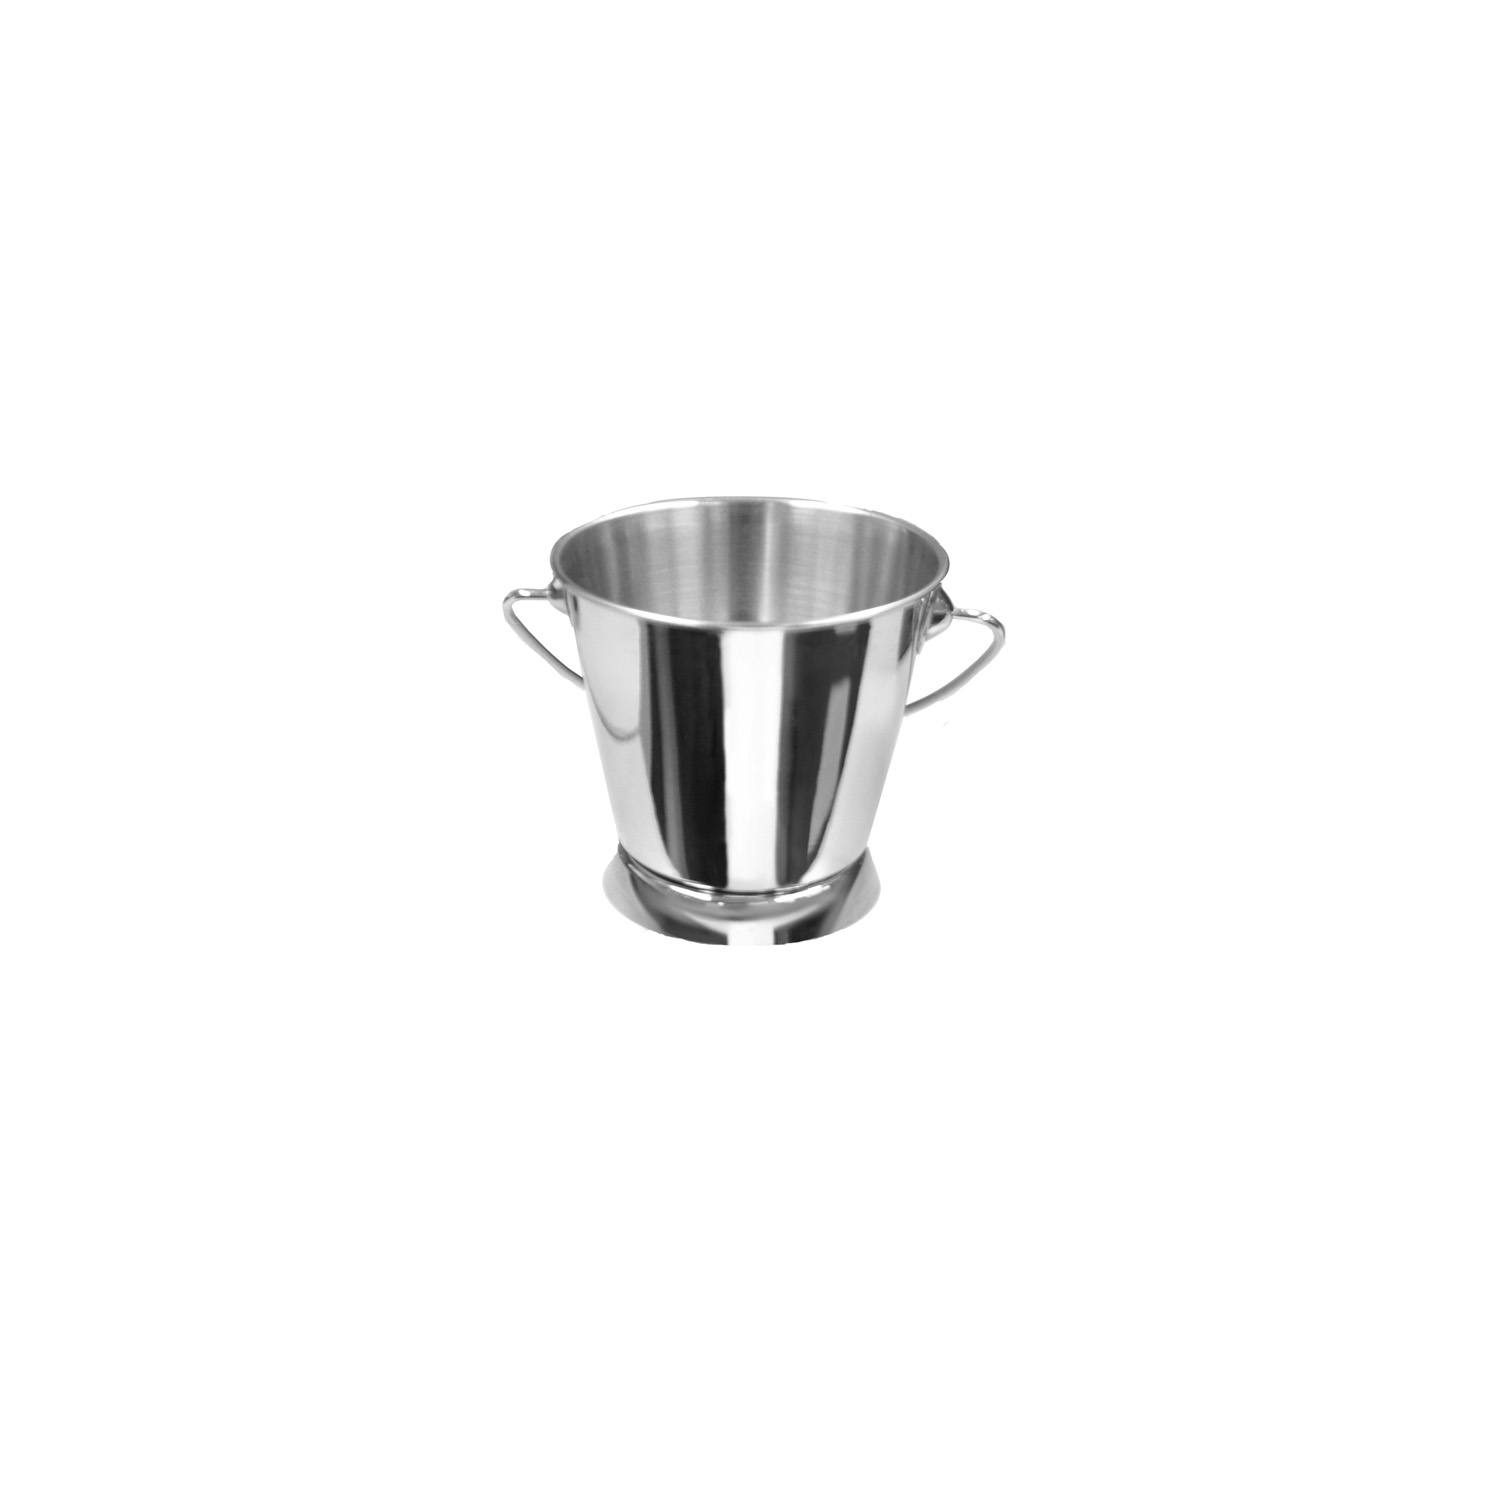 CAC China SMPL-4S Stainless Steel Mini Serving Pail with Smooth Handle 4" Dia x 3-3/4" H